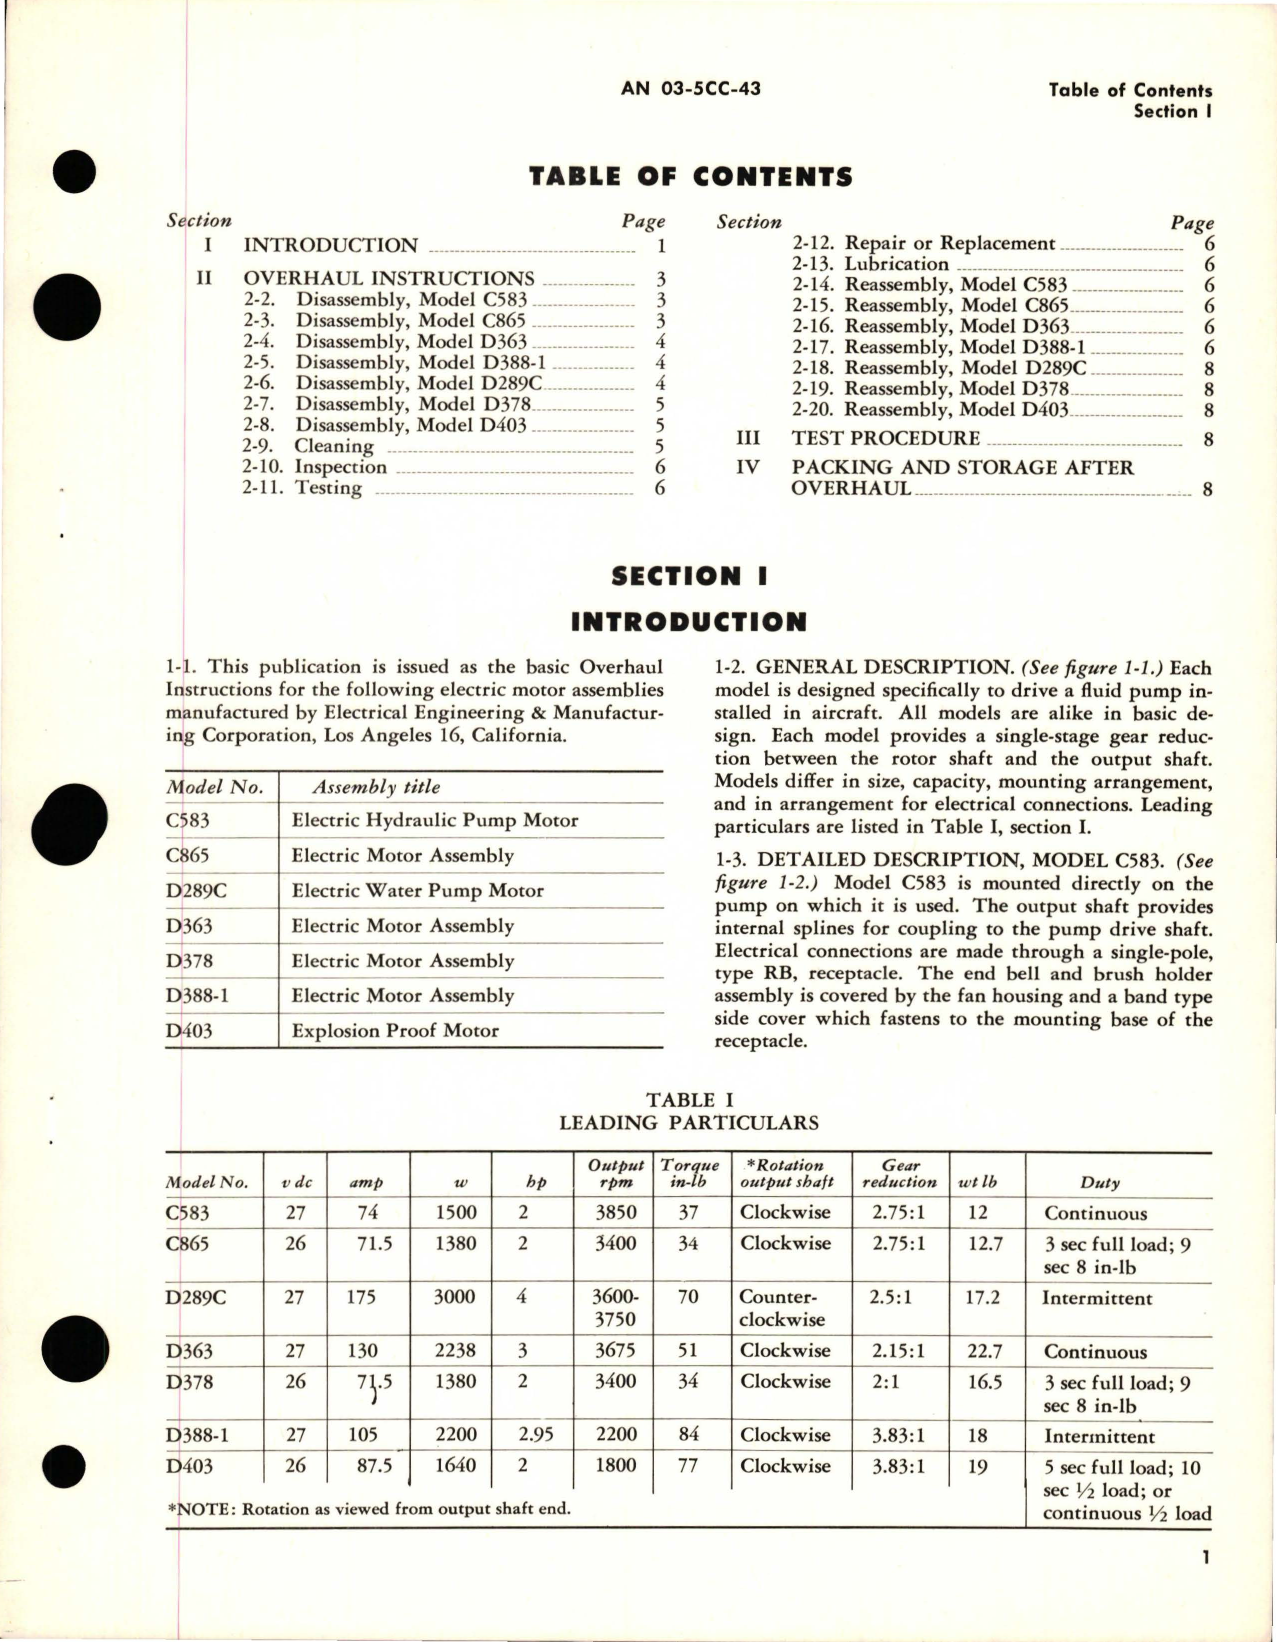 Sample page 5 from AirCorps Library document: Overhaul Instructions for Electric Motors 